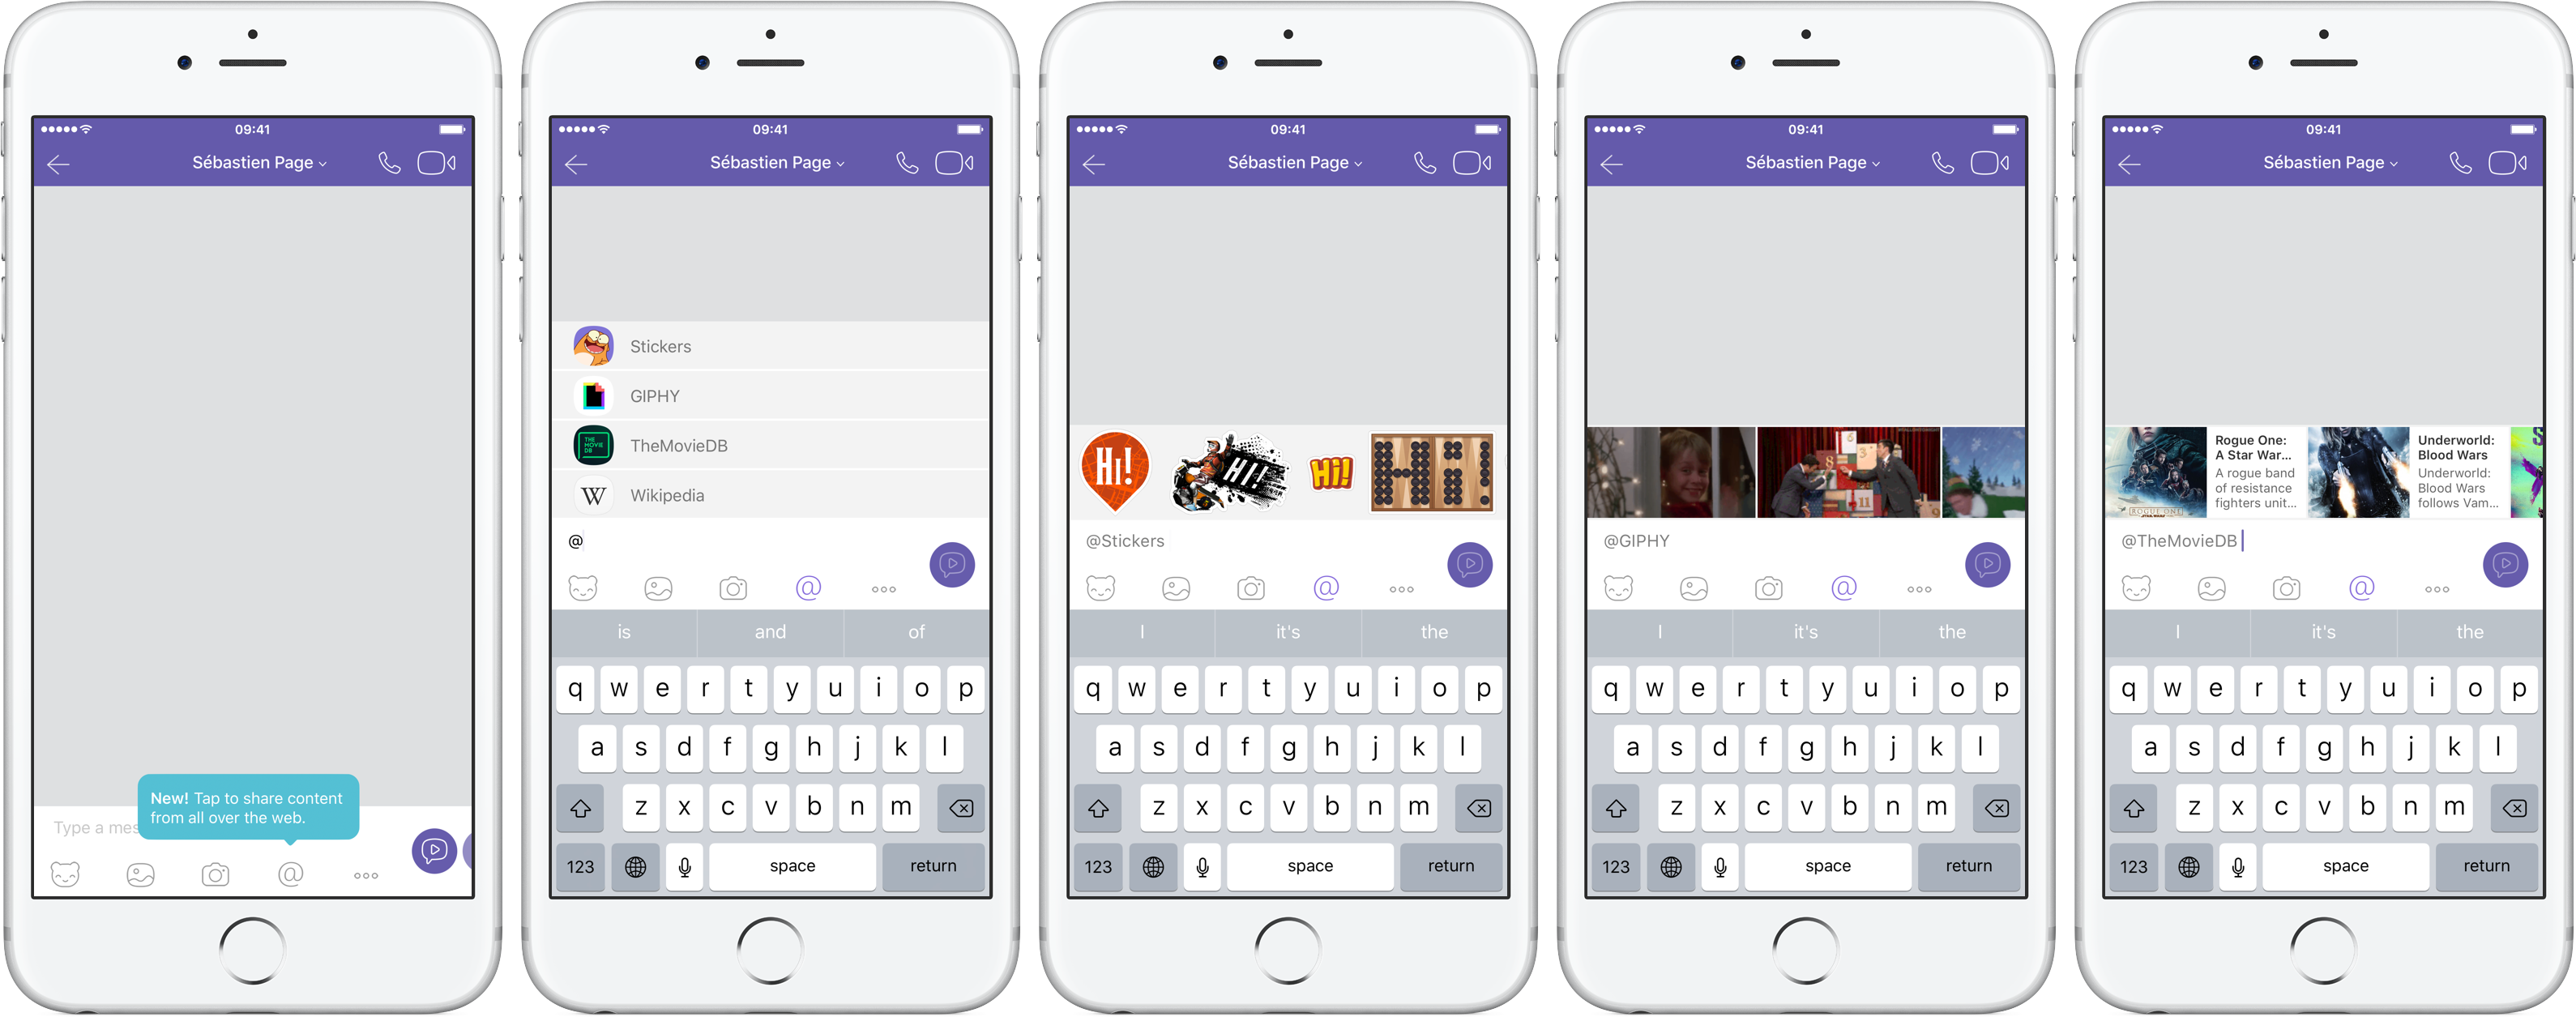 Viber 6.5.5 for iOS Chat extensions iPhone screenshot 001